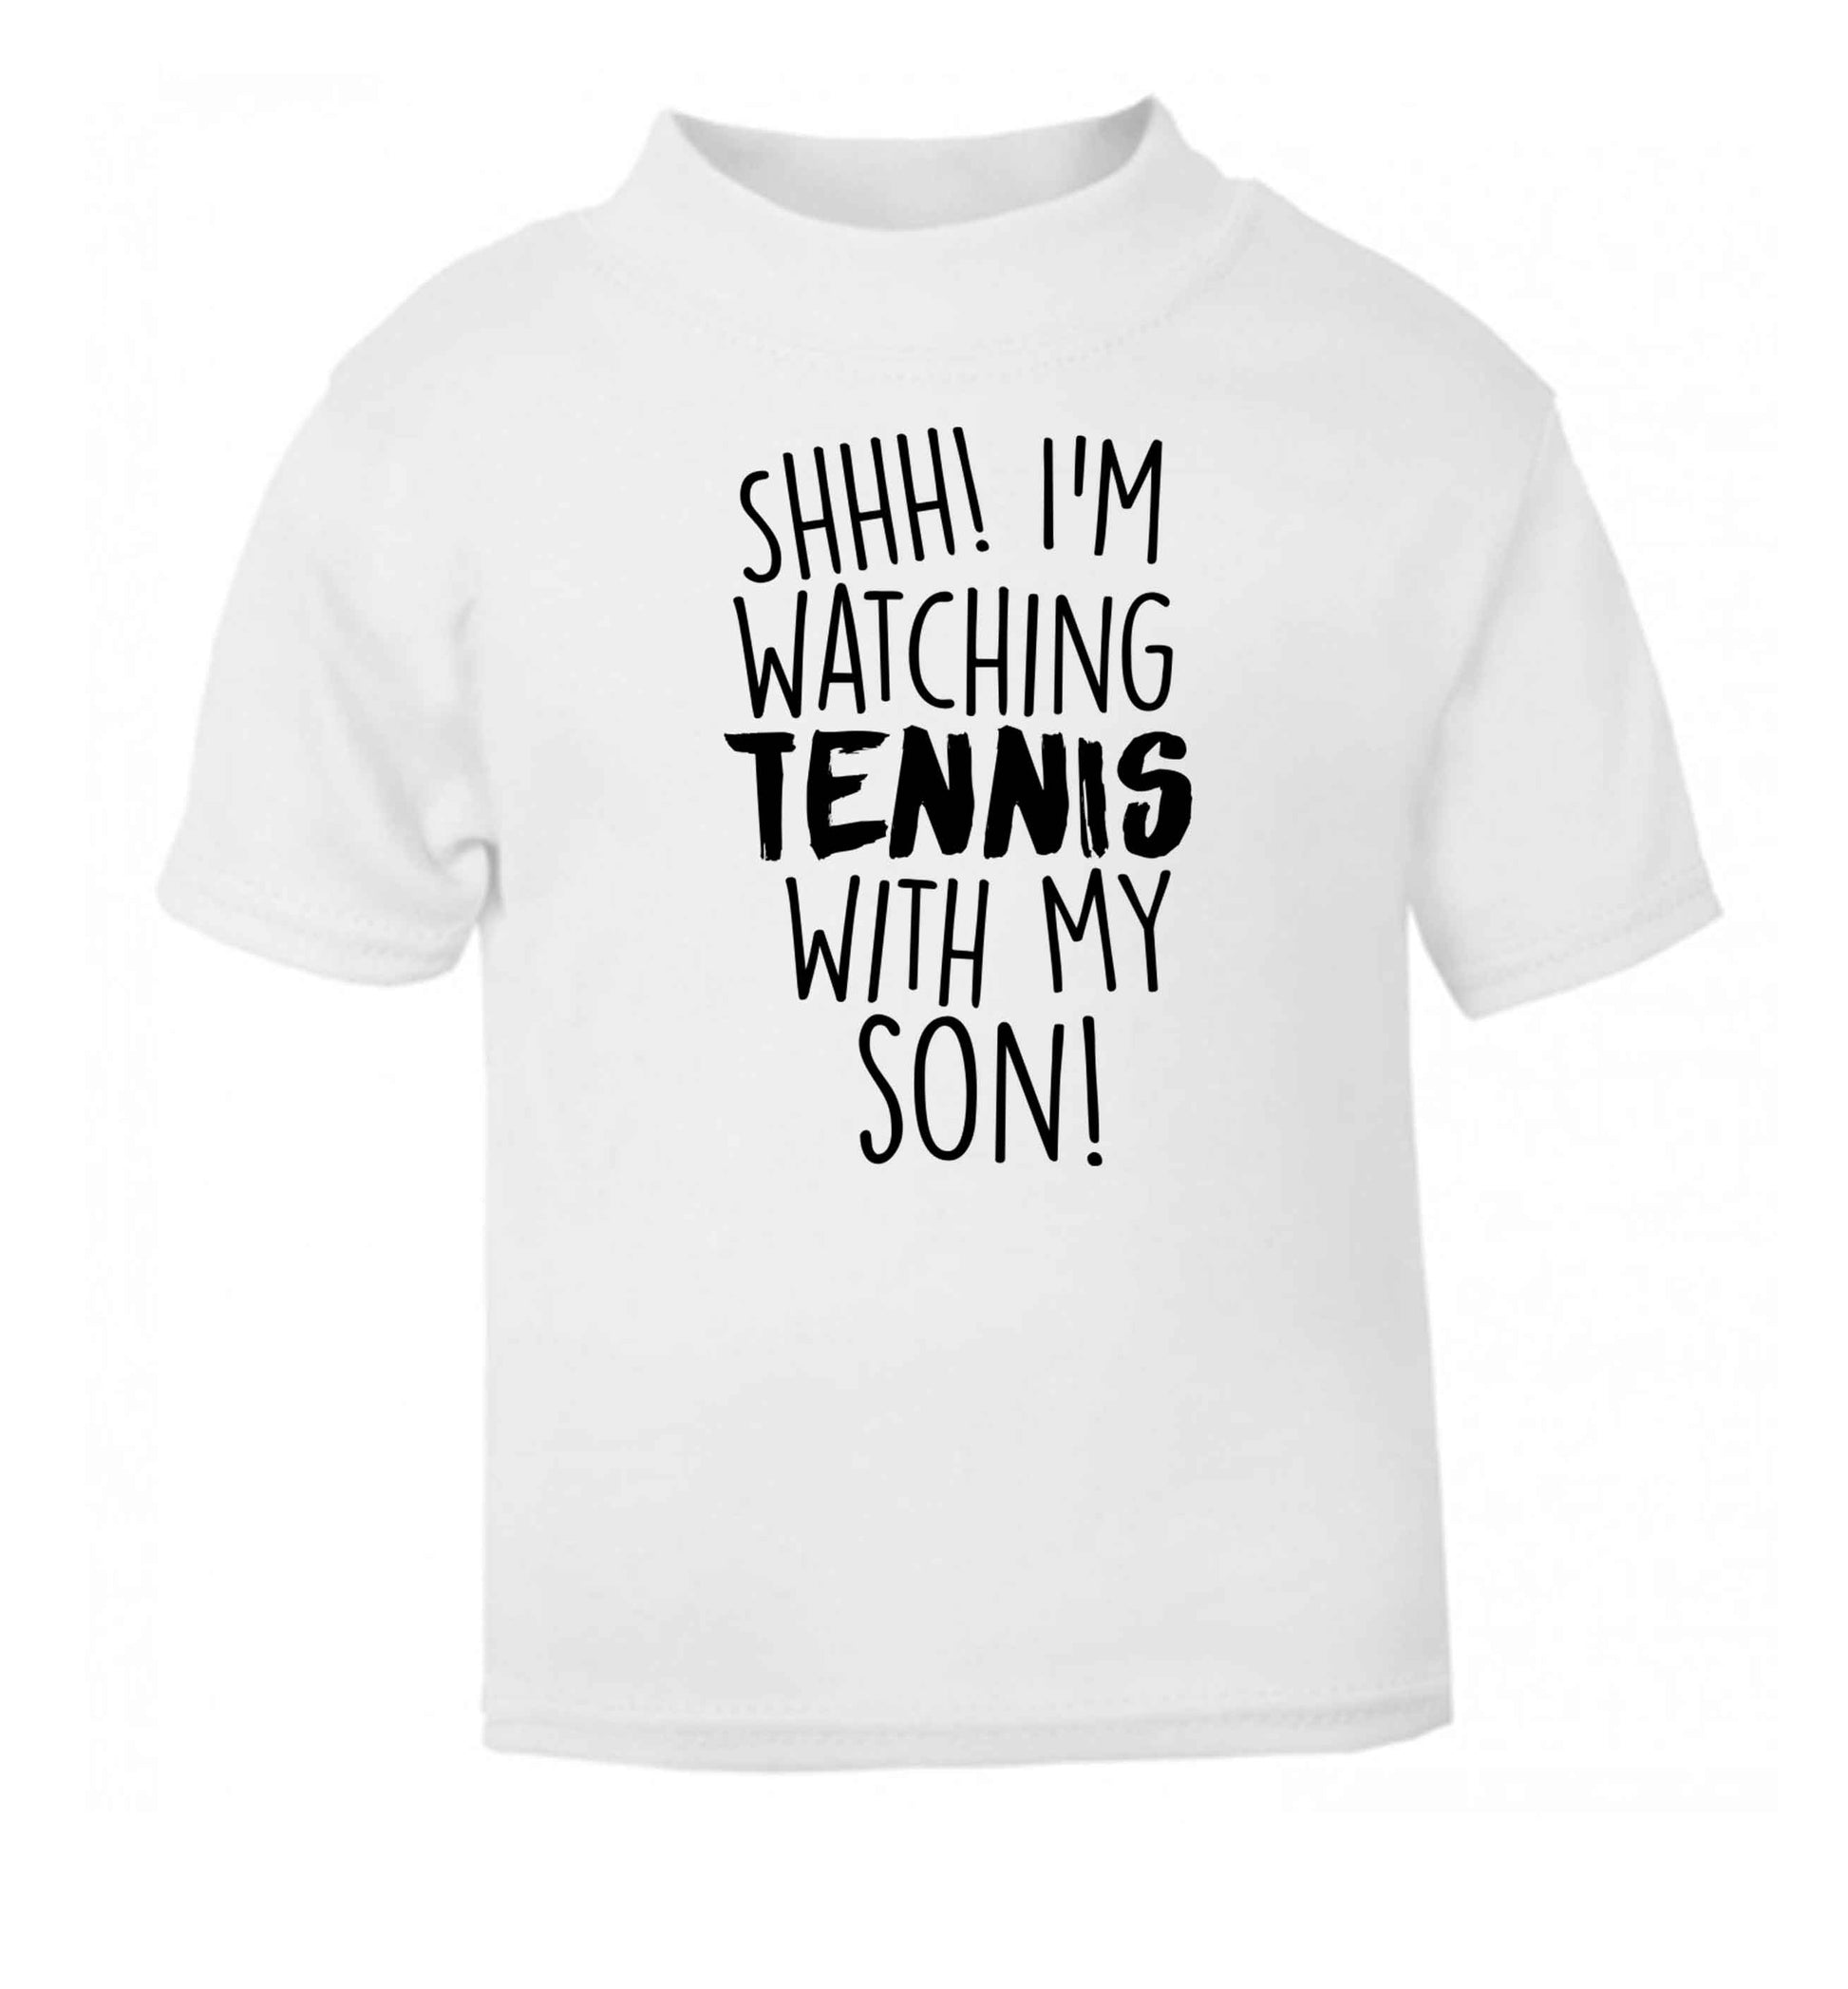 Shh! I'm watching tennis with my son! white Baby Toddler Tshirt 2 Years